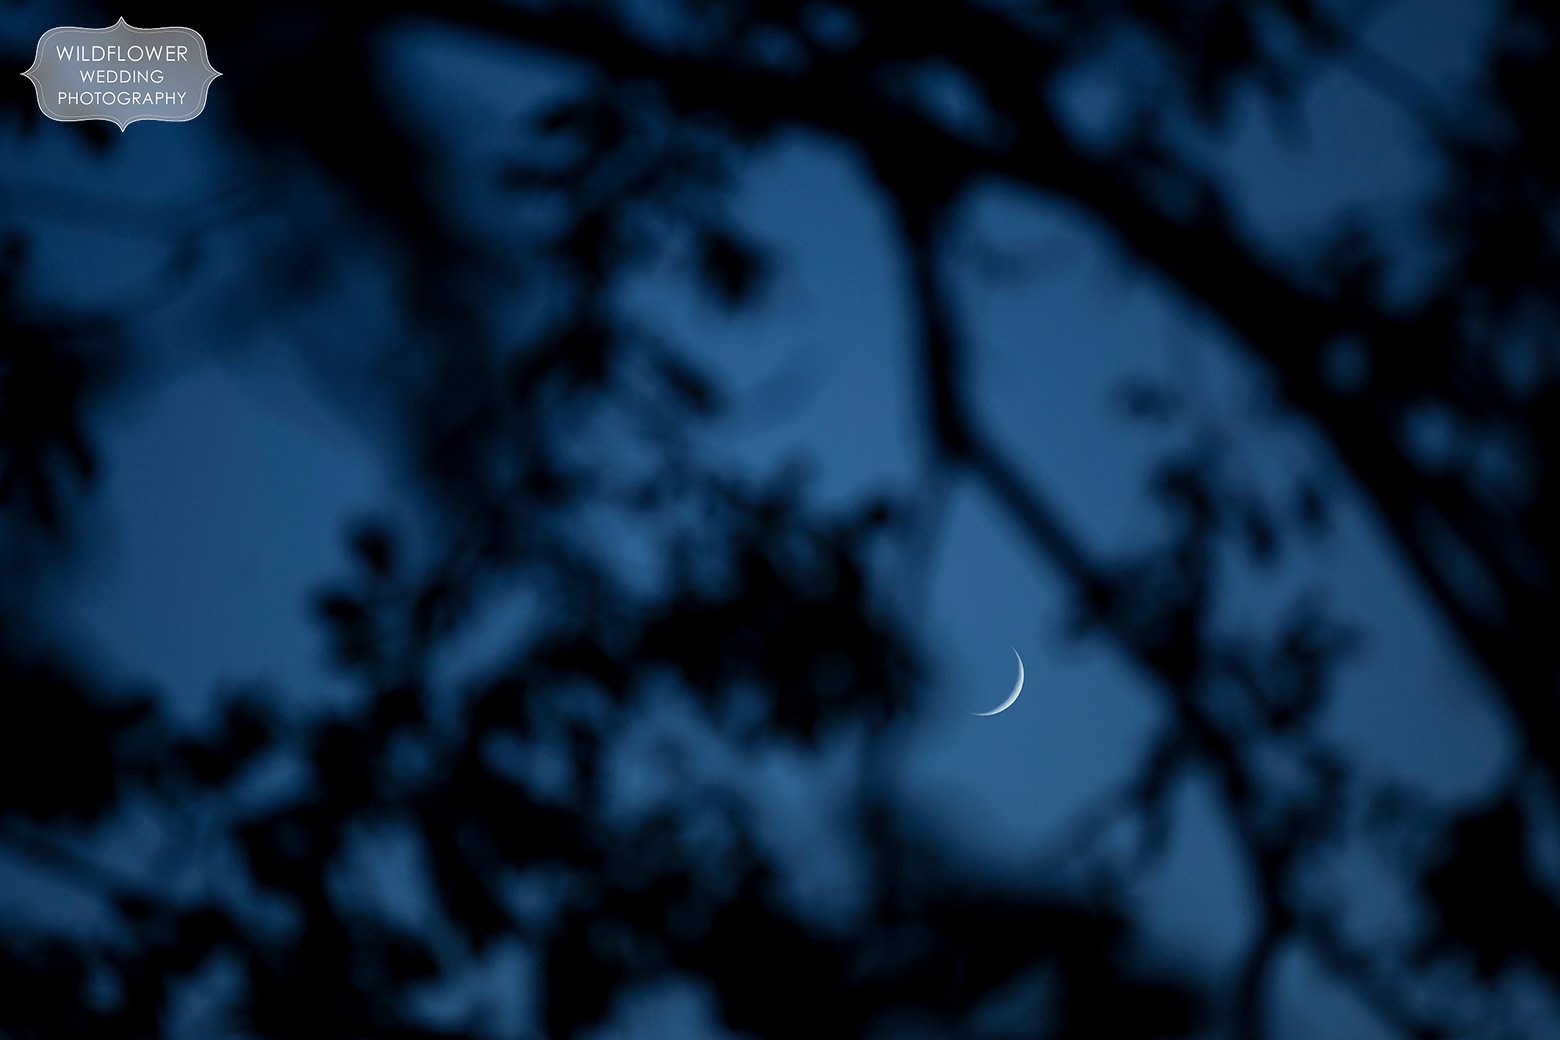 A crescent moon is seen through the trees during twilight at this mid-MO country engagement session.